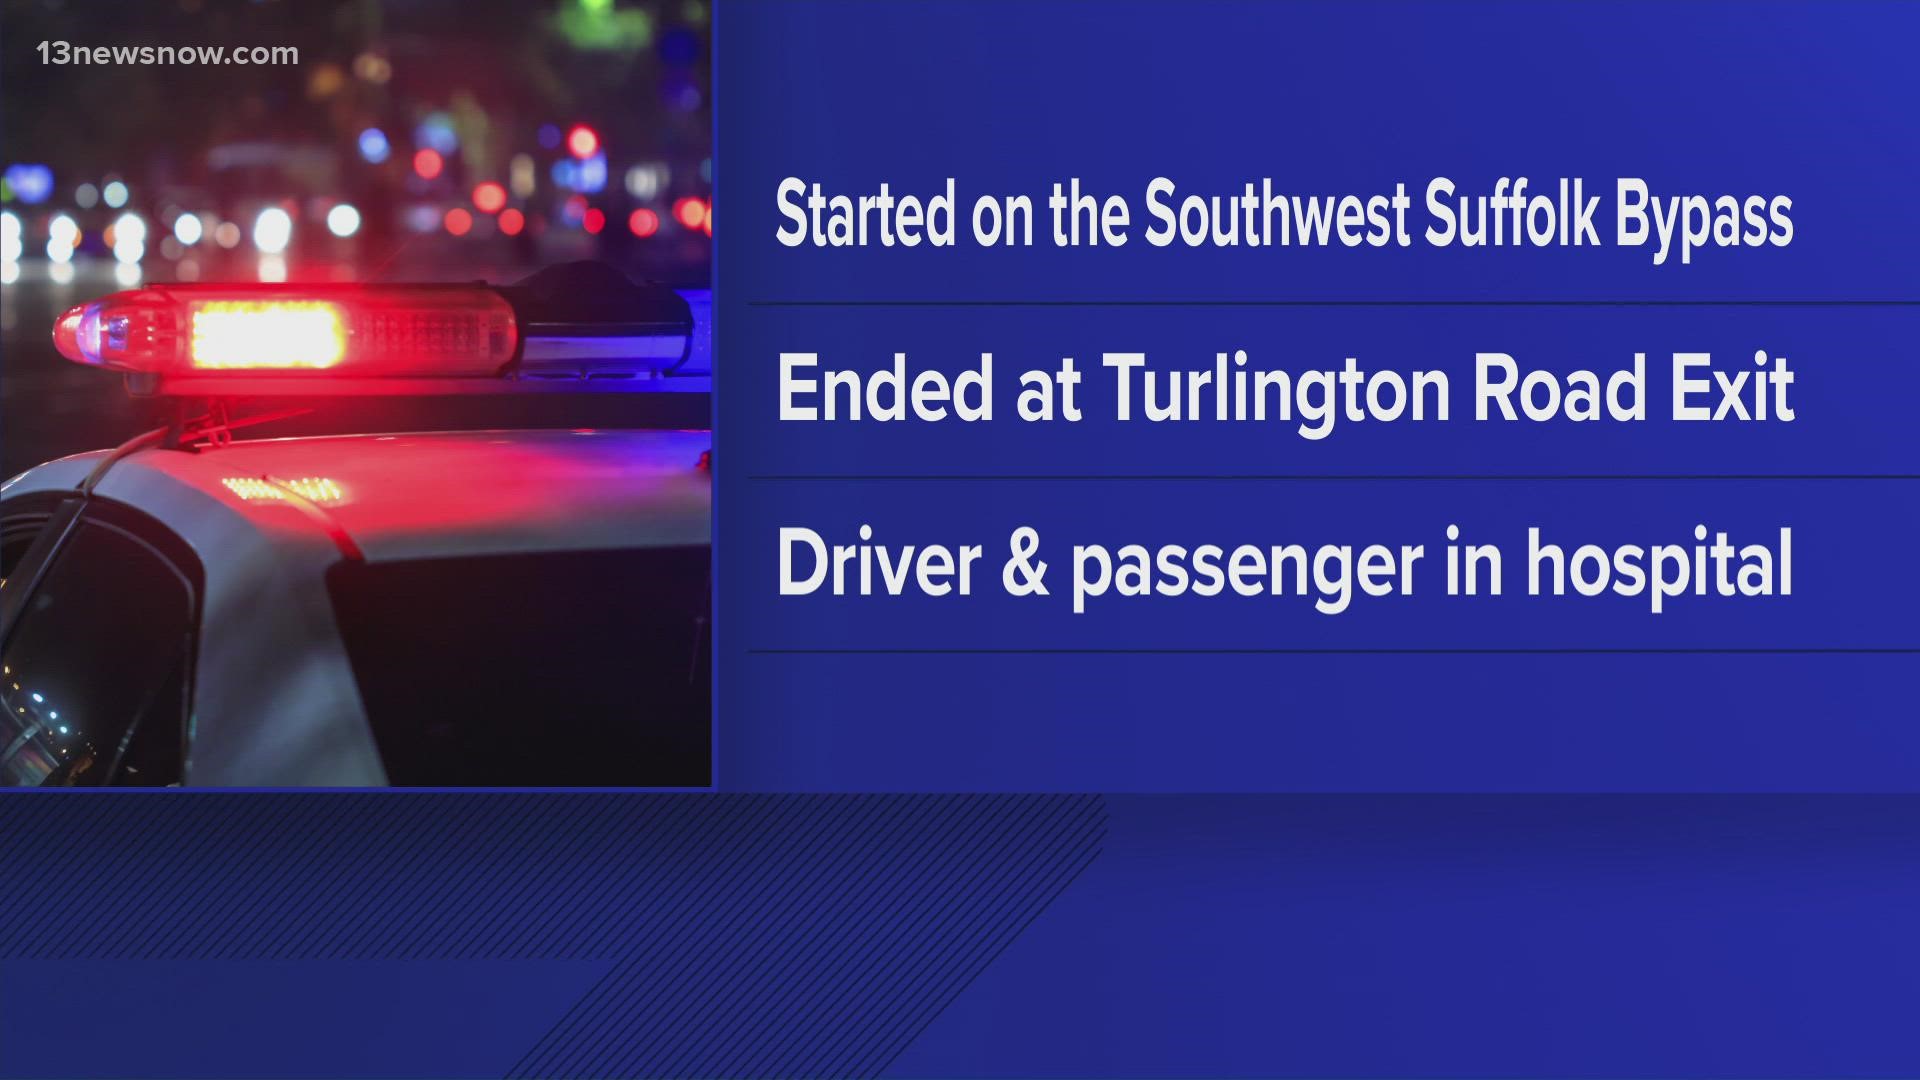 The vehicle crashed on the Turlington Road exit on the Southwest Suffolk Bypass.